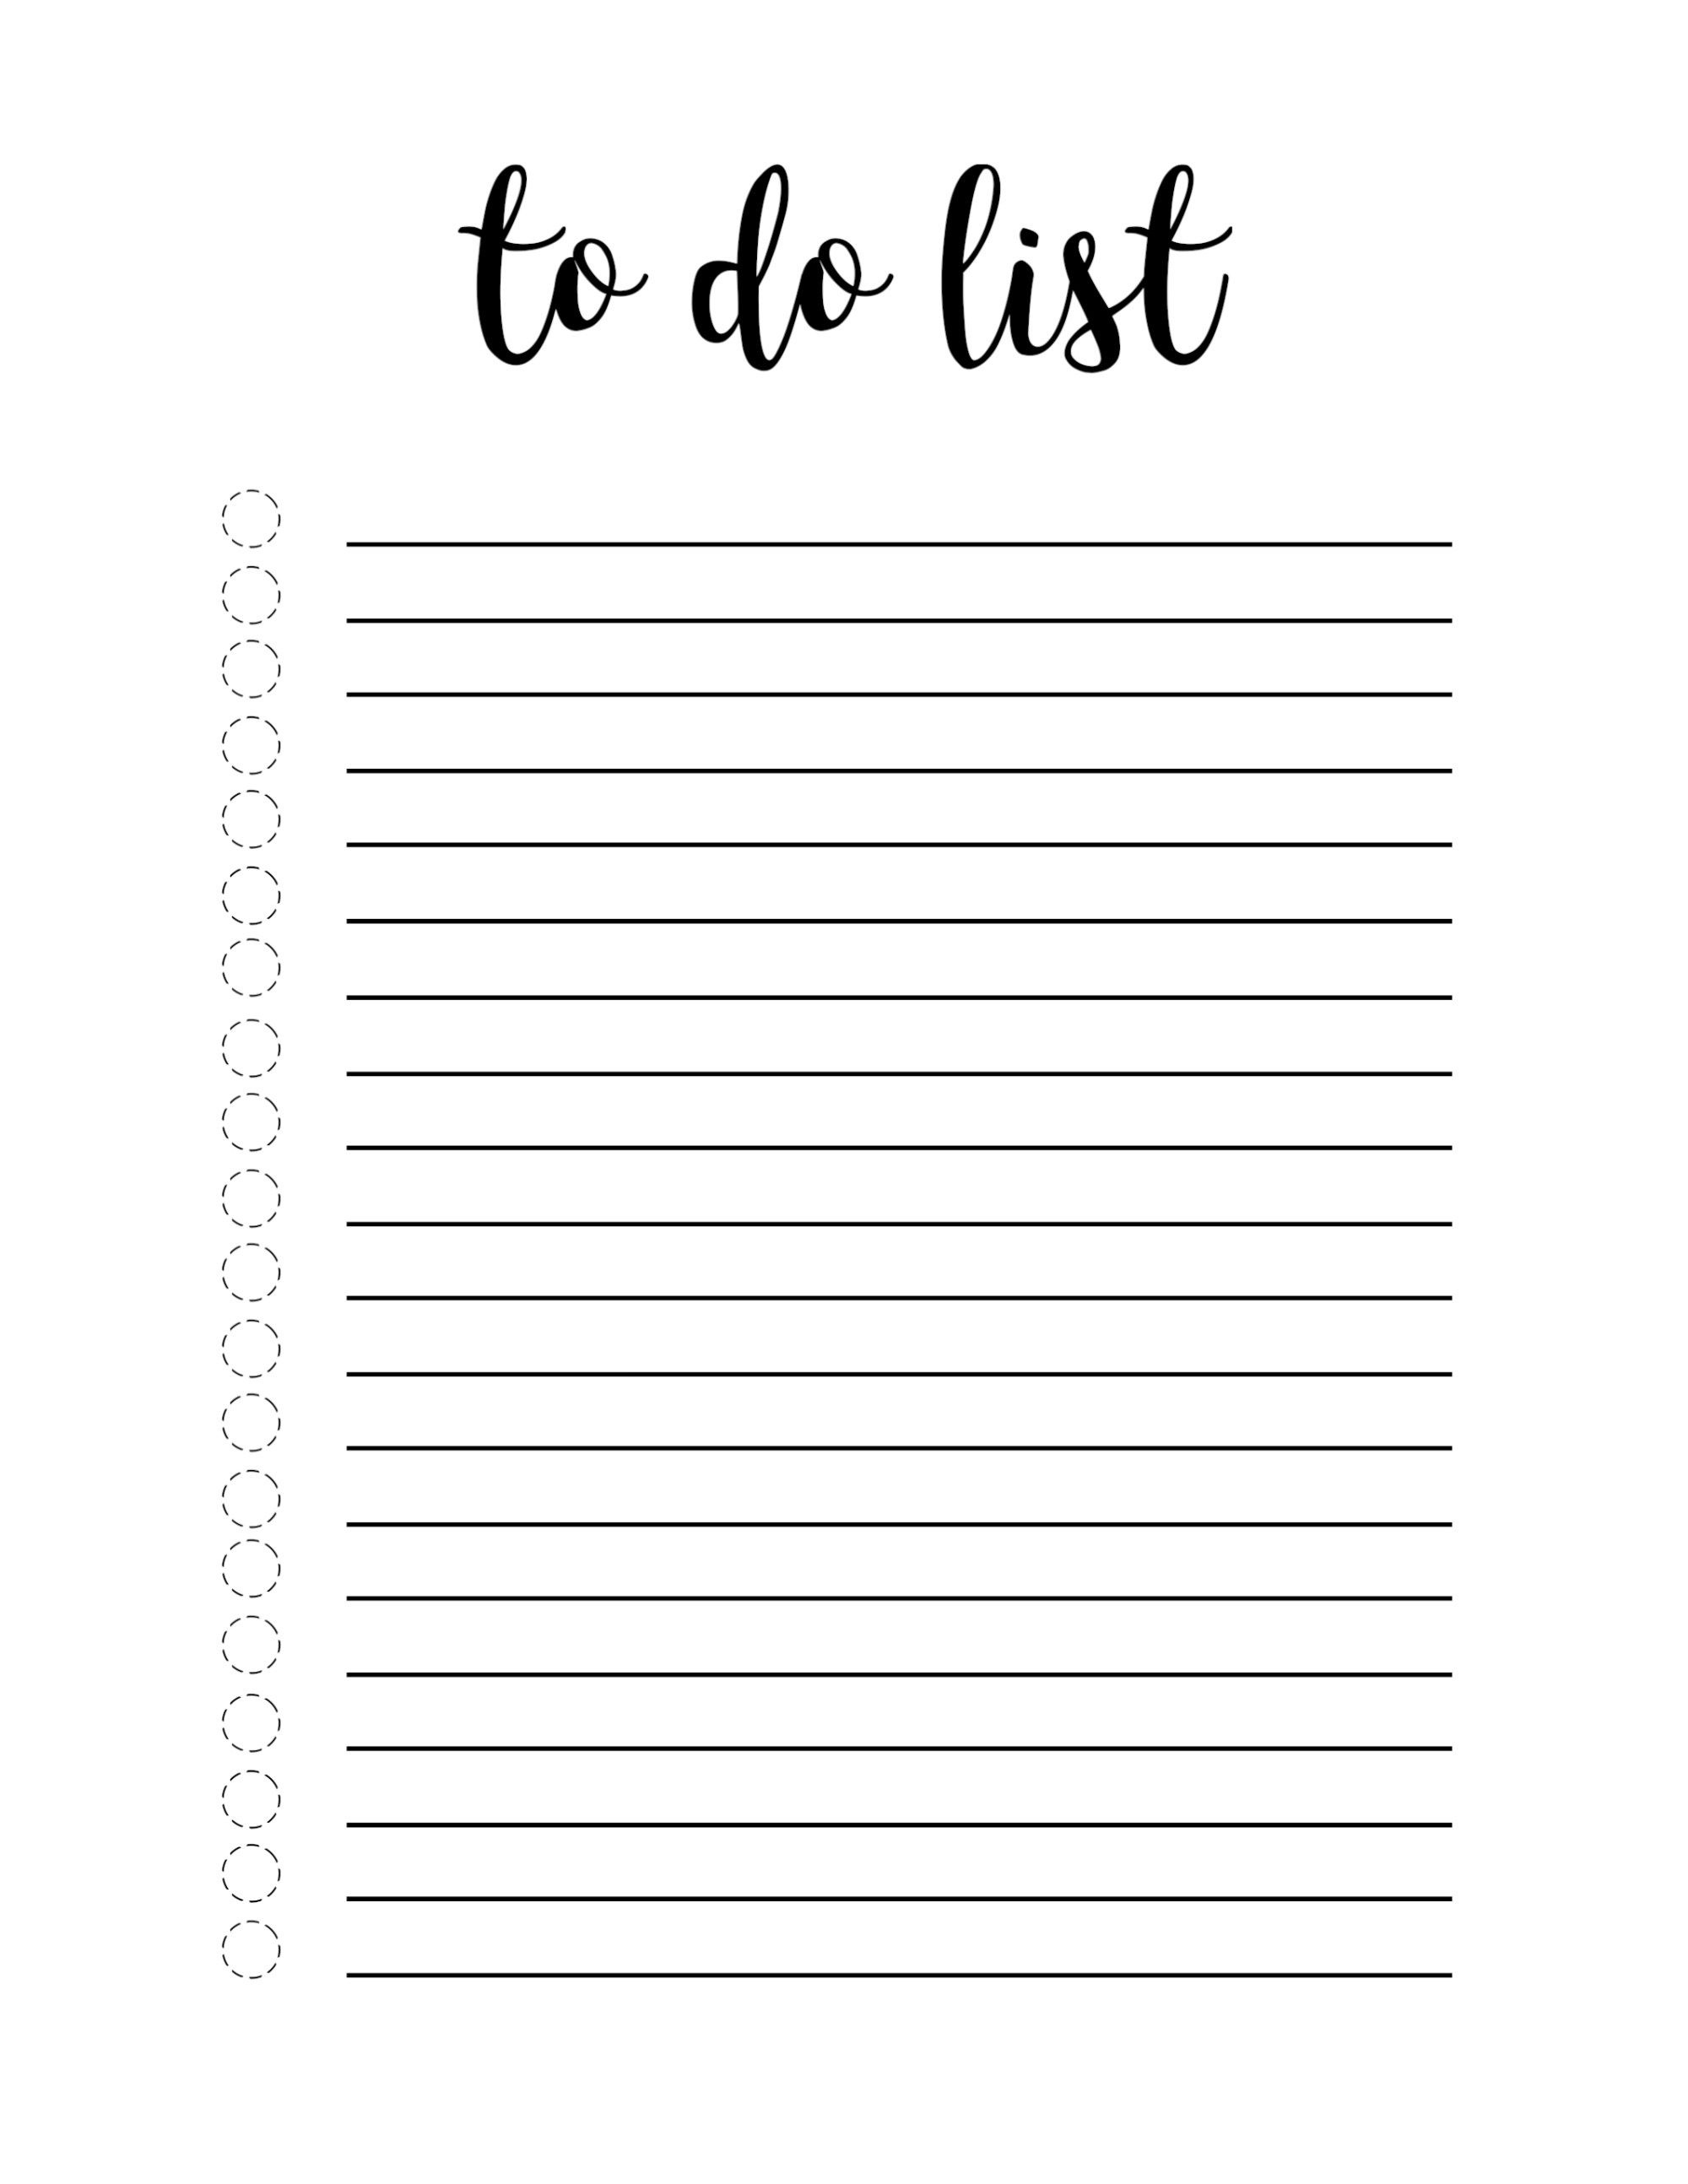 Free Printable To Do List Template | Making Notebooks | Todo List - To Do List Free Printable